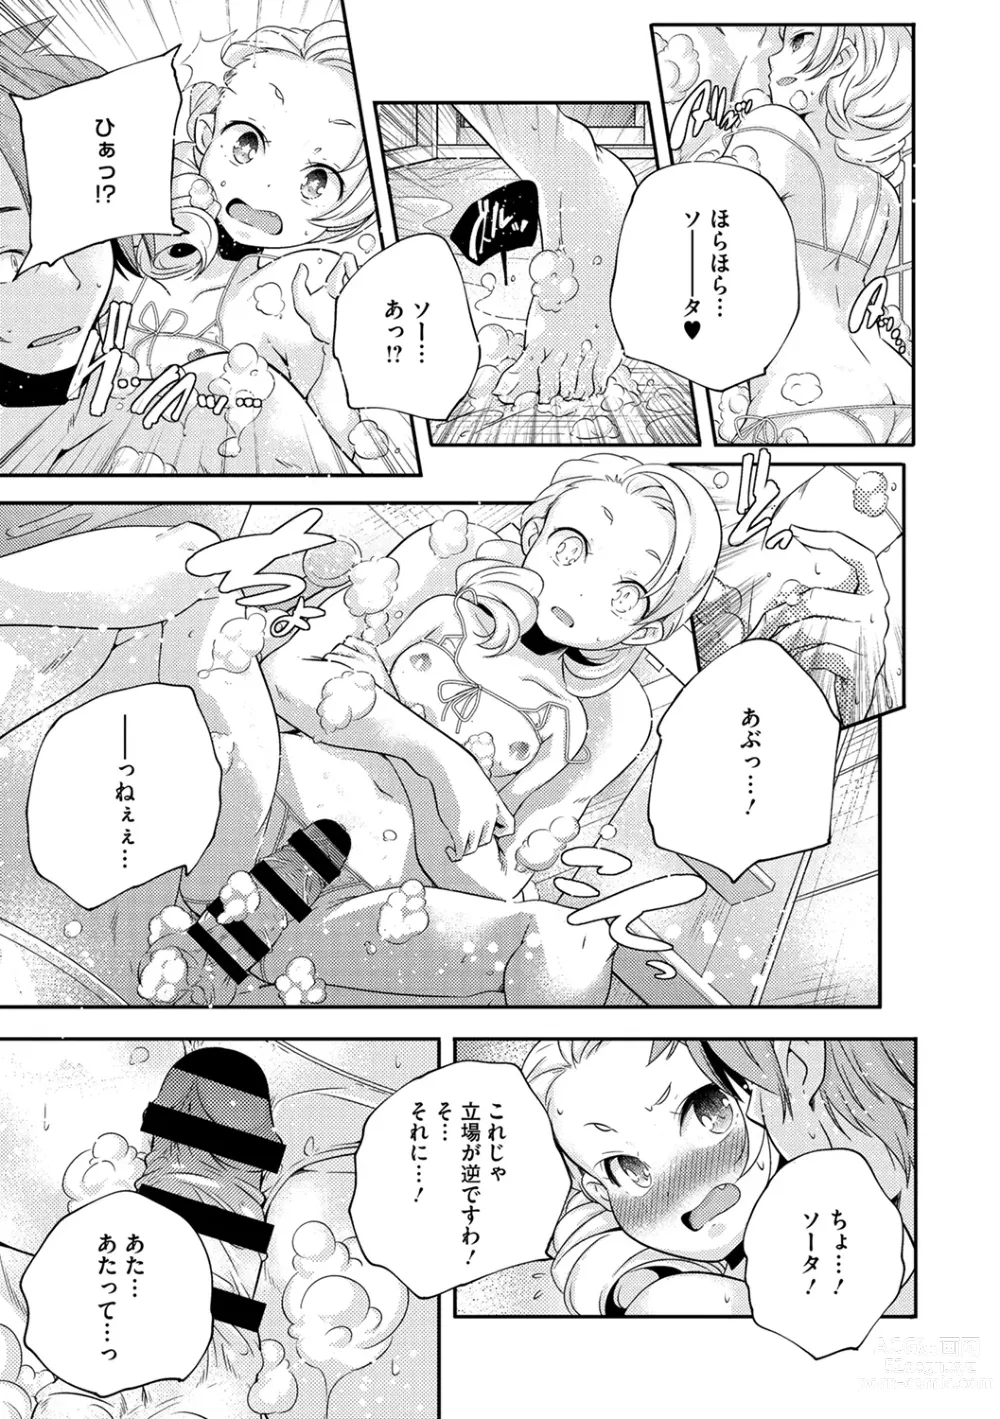 Page 31 of manga LQ -Little Queen- Vol. 52